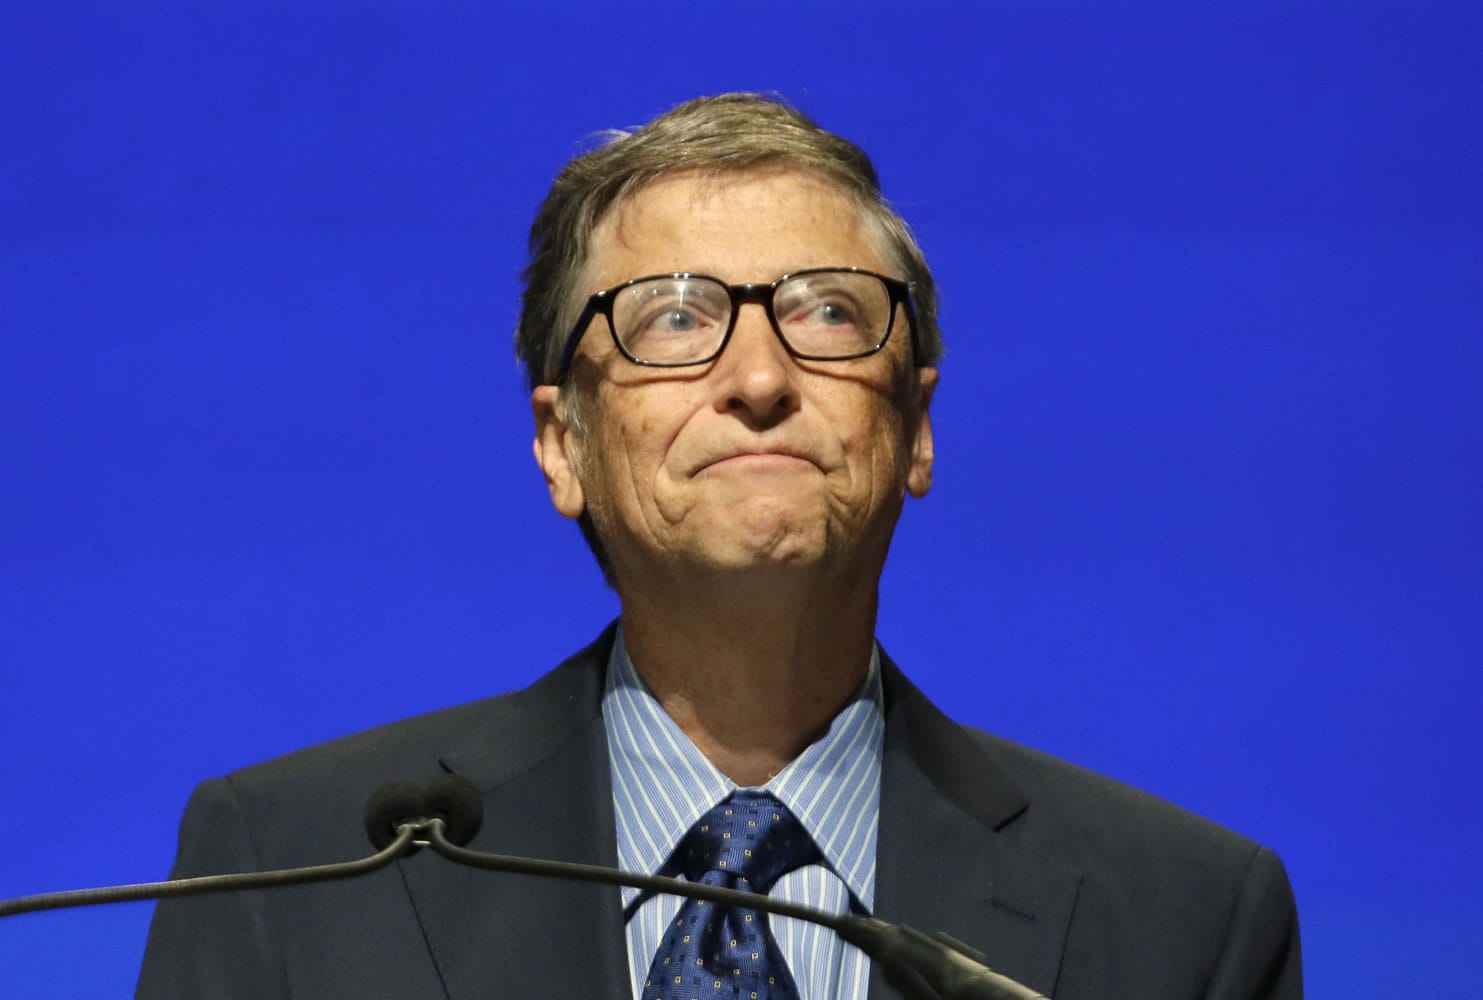 Microsoft chairman Bill Gates chokes up as he end his remarks at the company's annual shareholders meeting Tuesday.